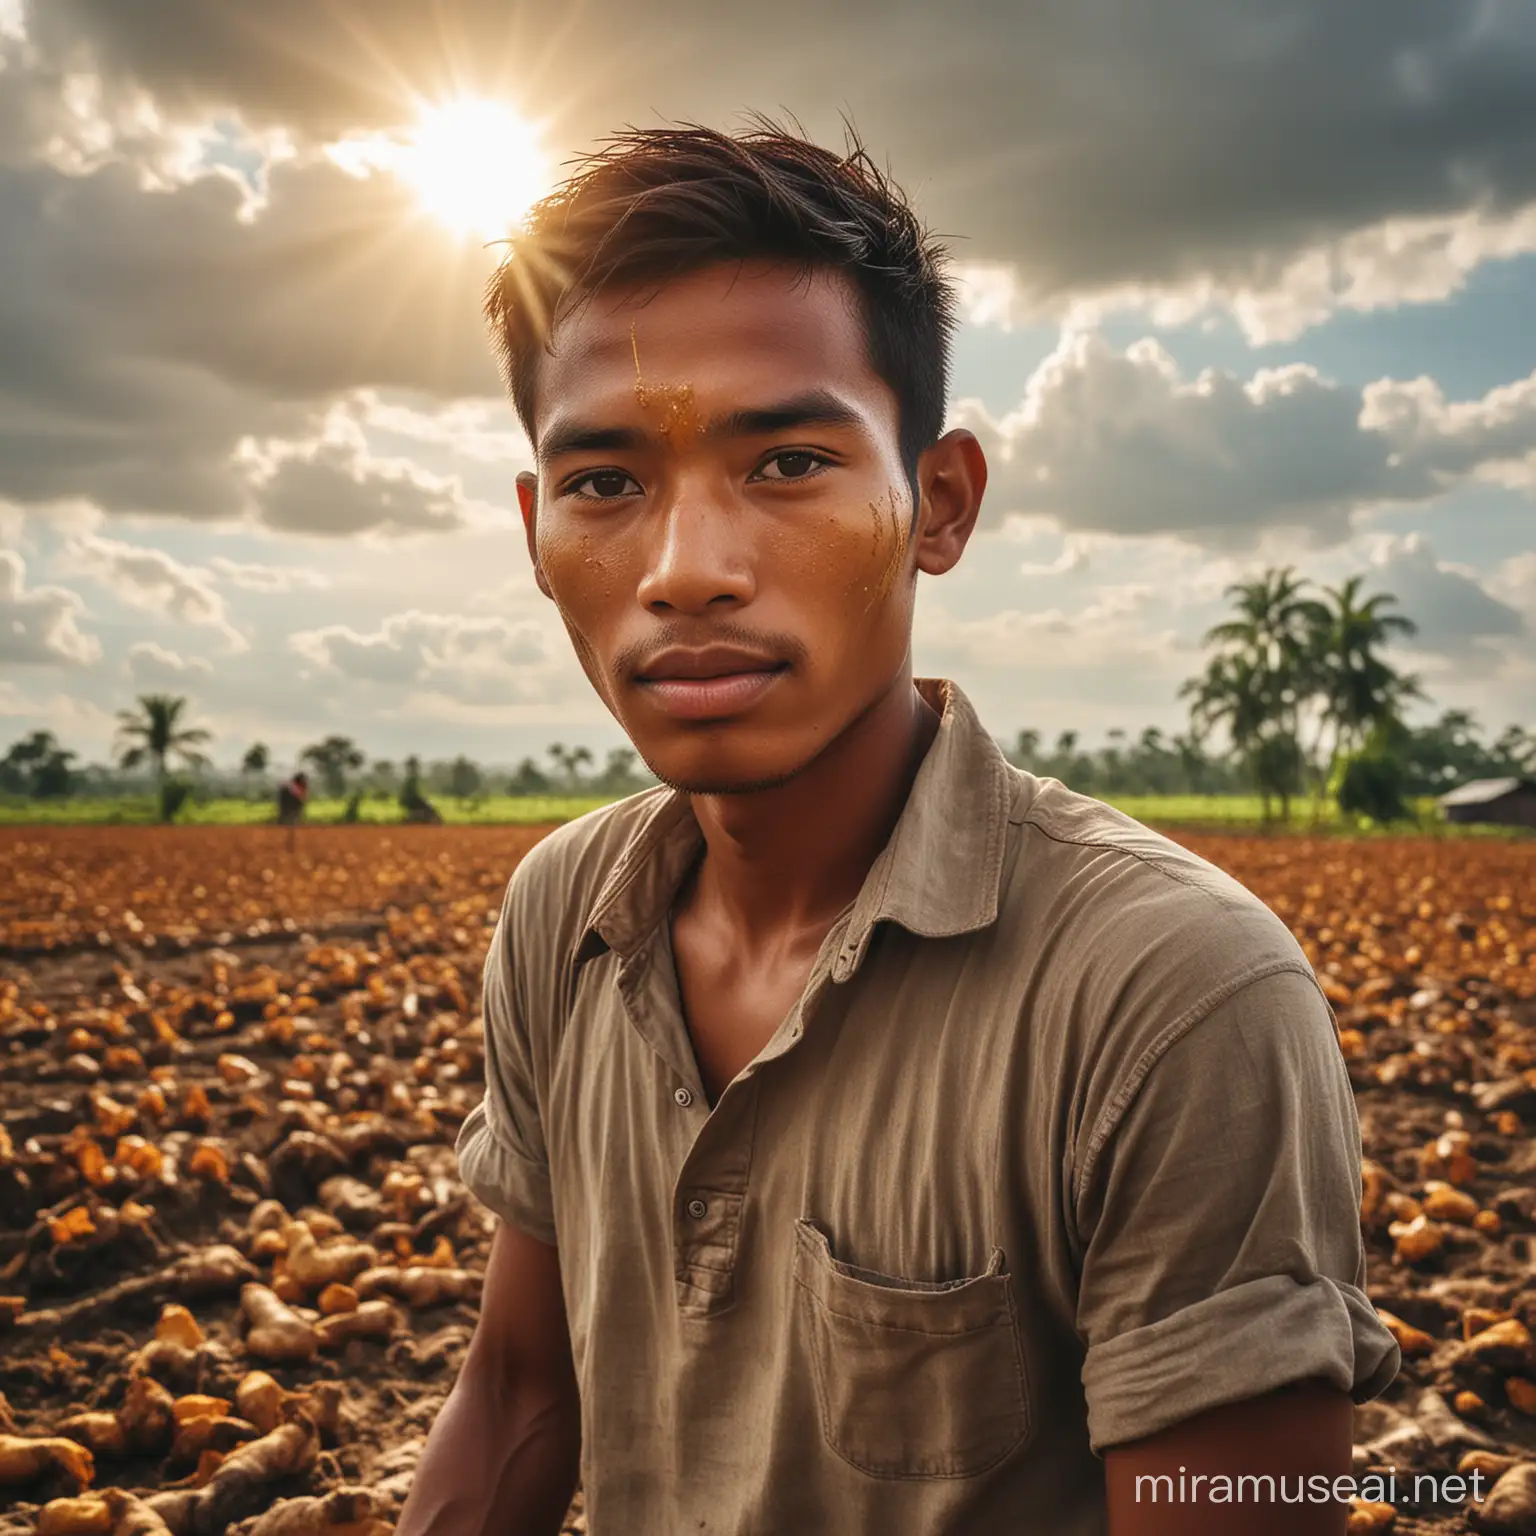 Indonesian Youth Harvesting Turmeric in SunDrenched Fields